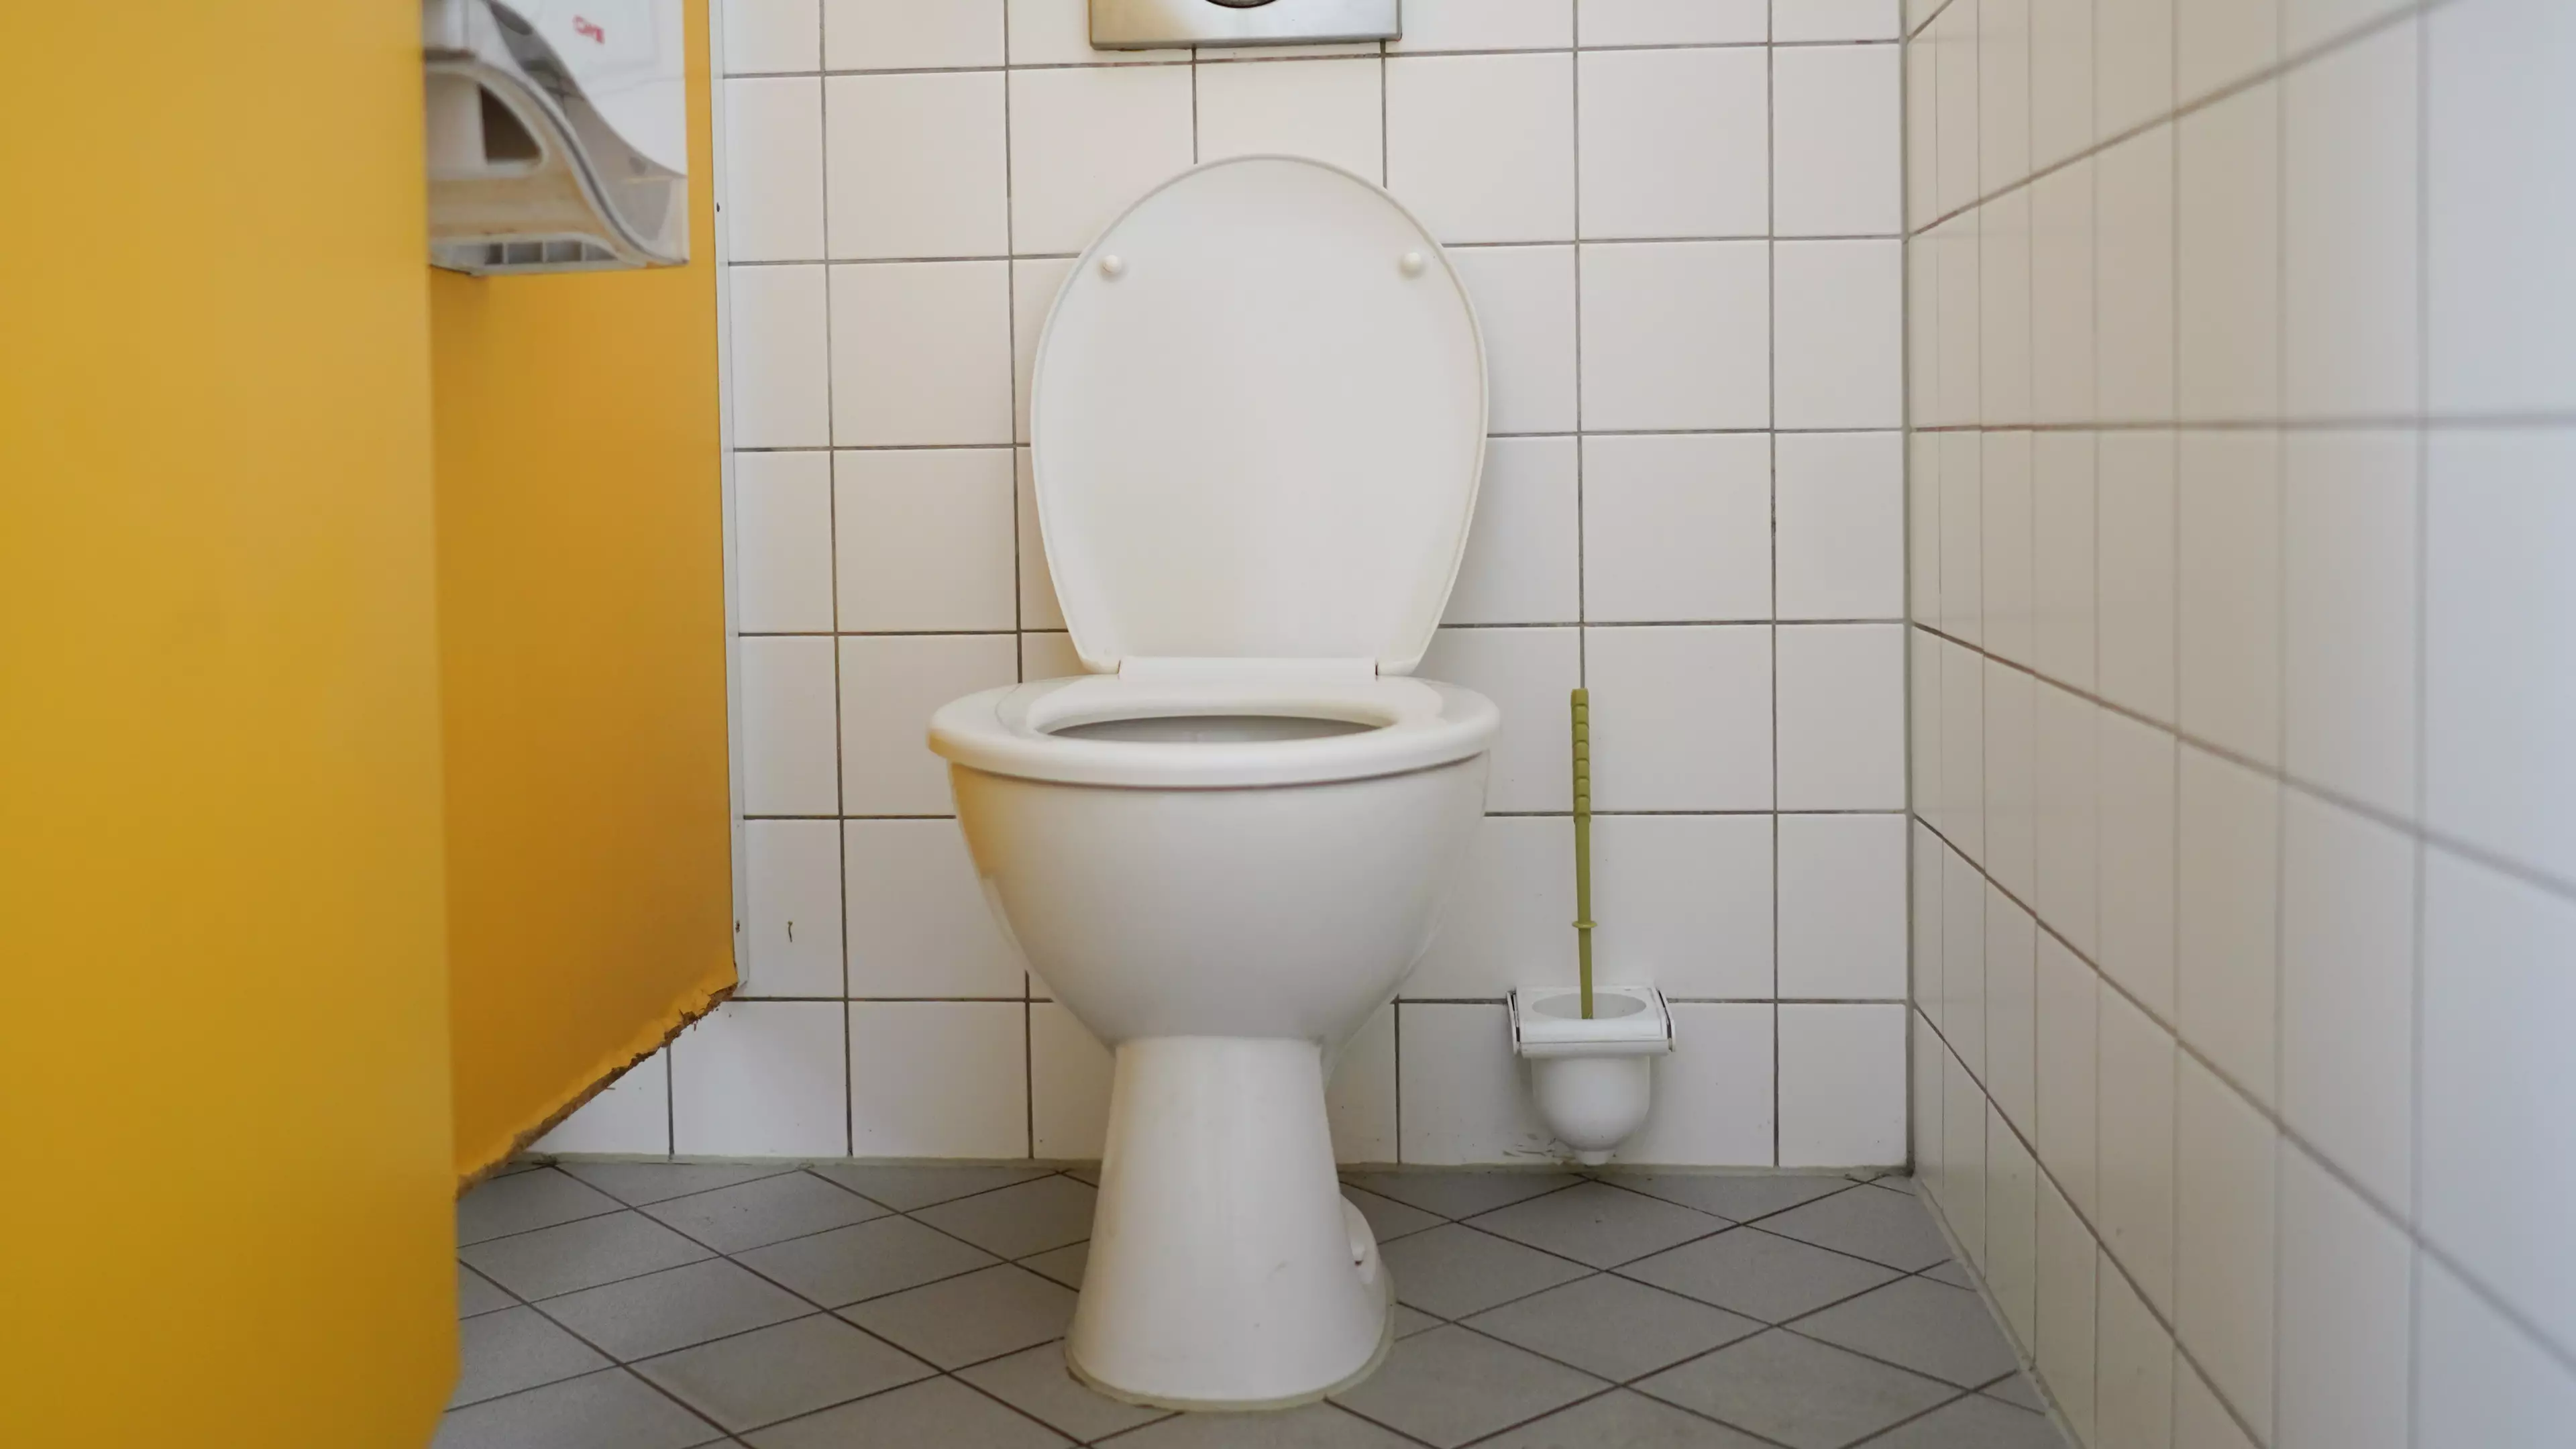 Man Sacked For Pooing In Front Of Colleagues Loses Unfair Dismissal Tribunal 